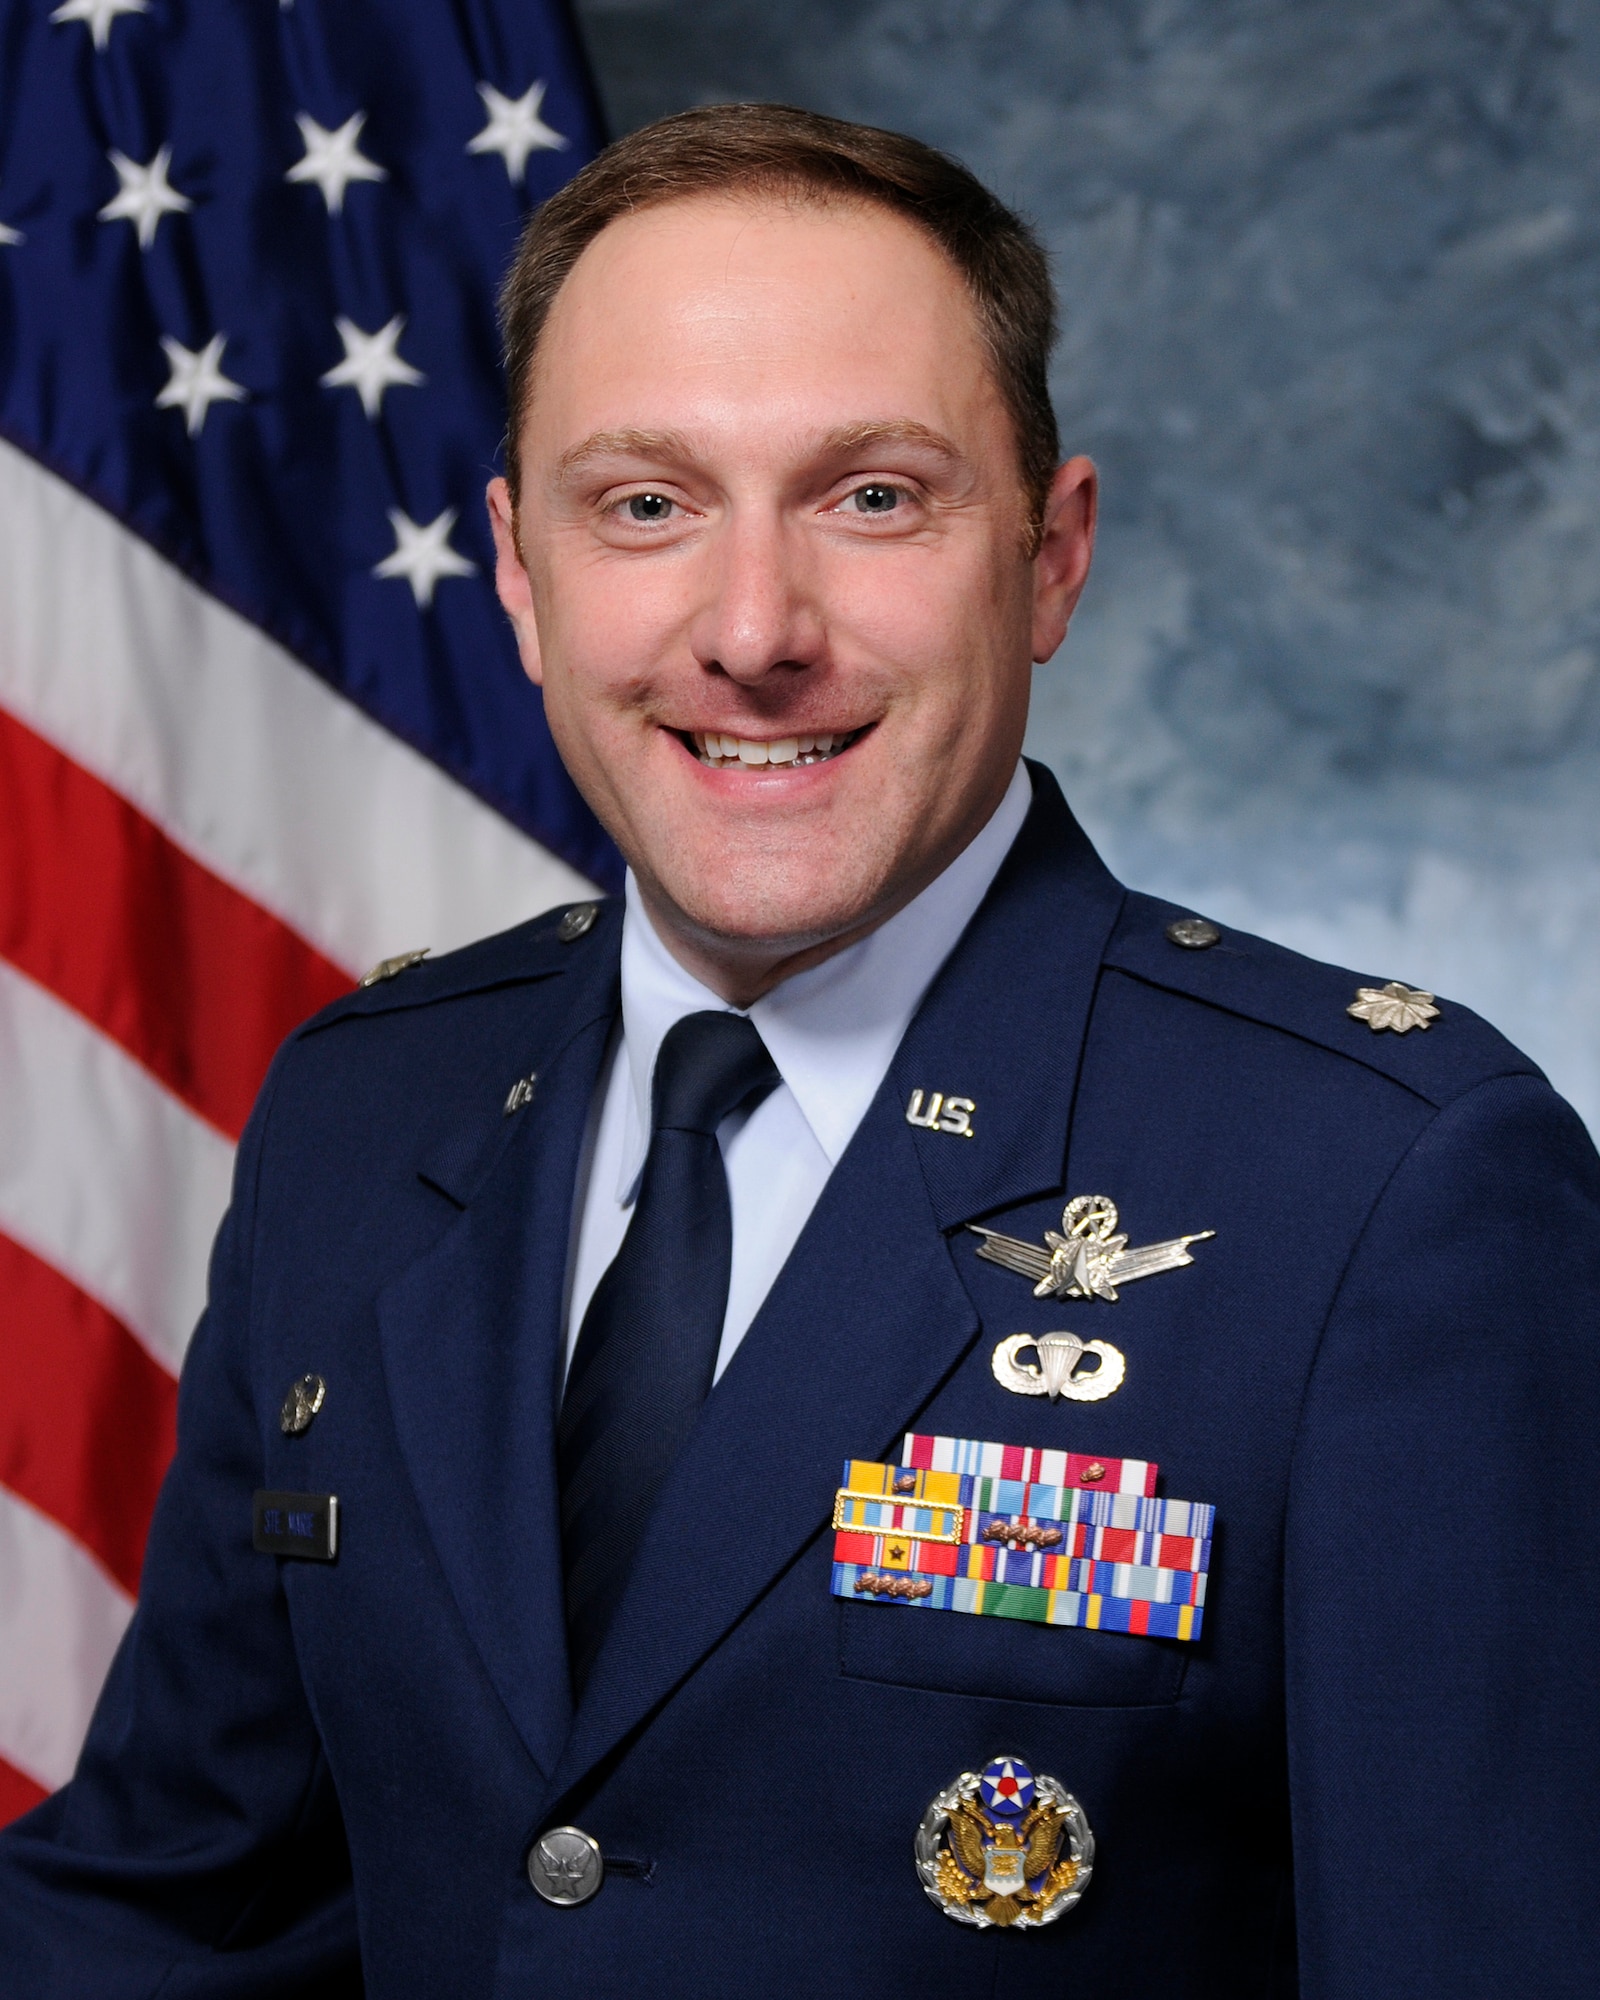 Lt. Col. Thomas Ste. Marie, 2nd Space Operations Squadron commander (U.S. Air Force photo)
